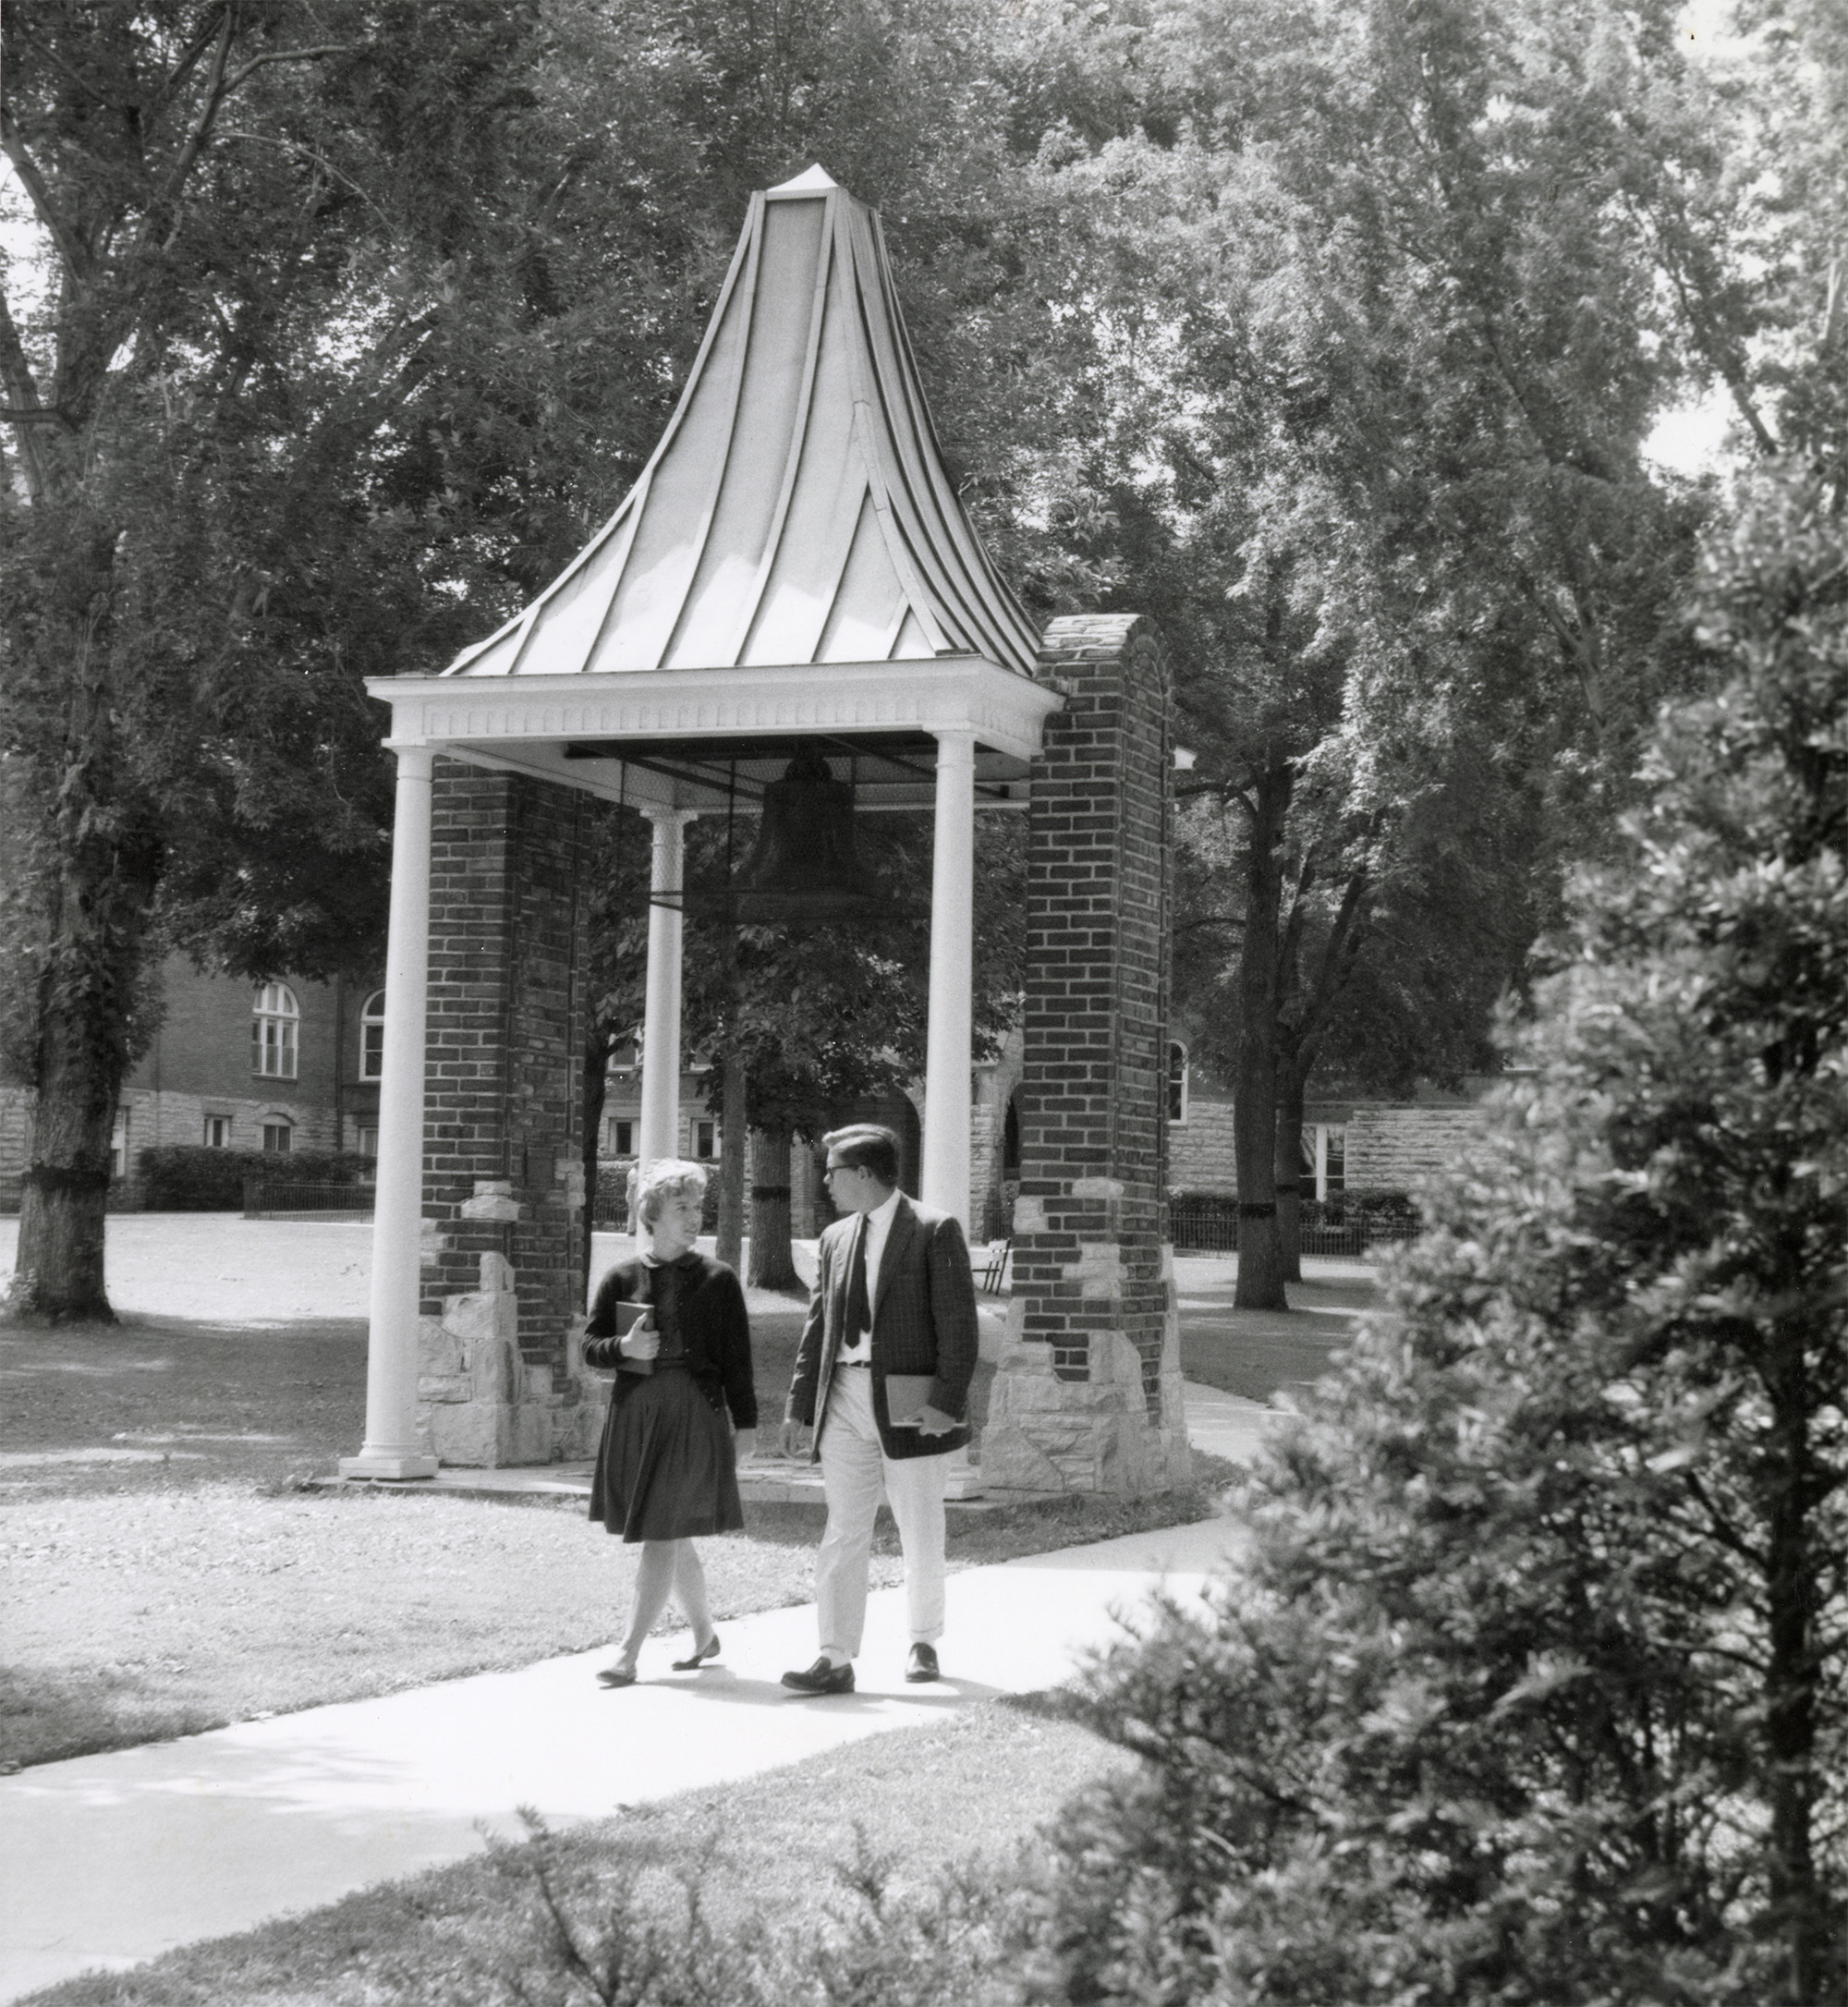 Two people walk past the Bell Tower.